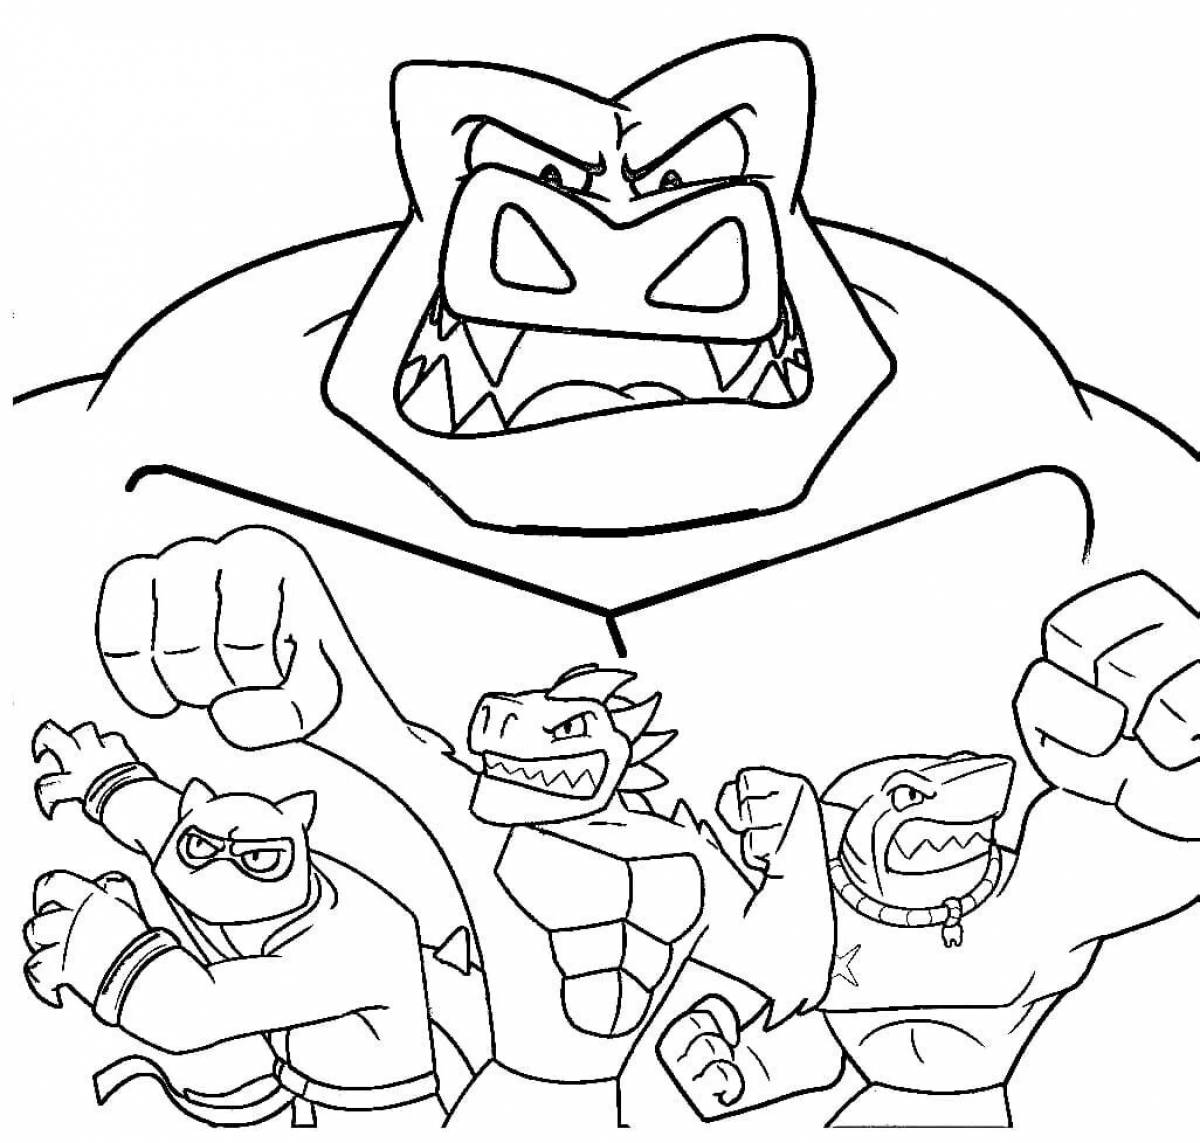 Shiny gujitsu coloring page for toddlers